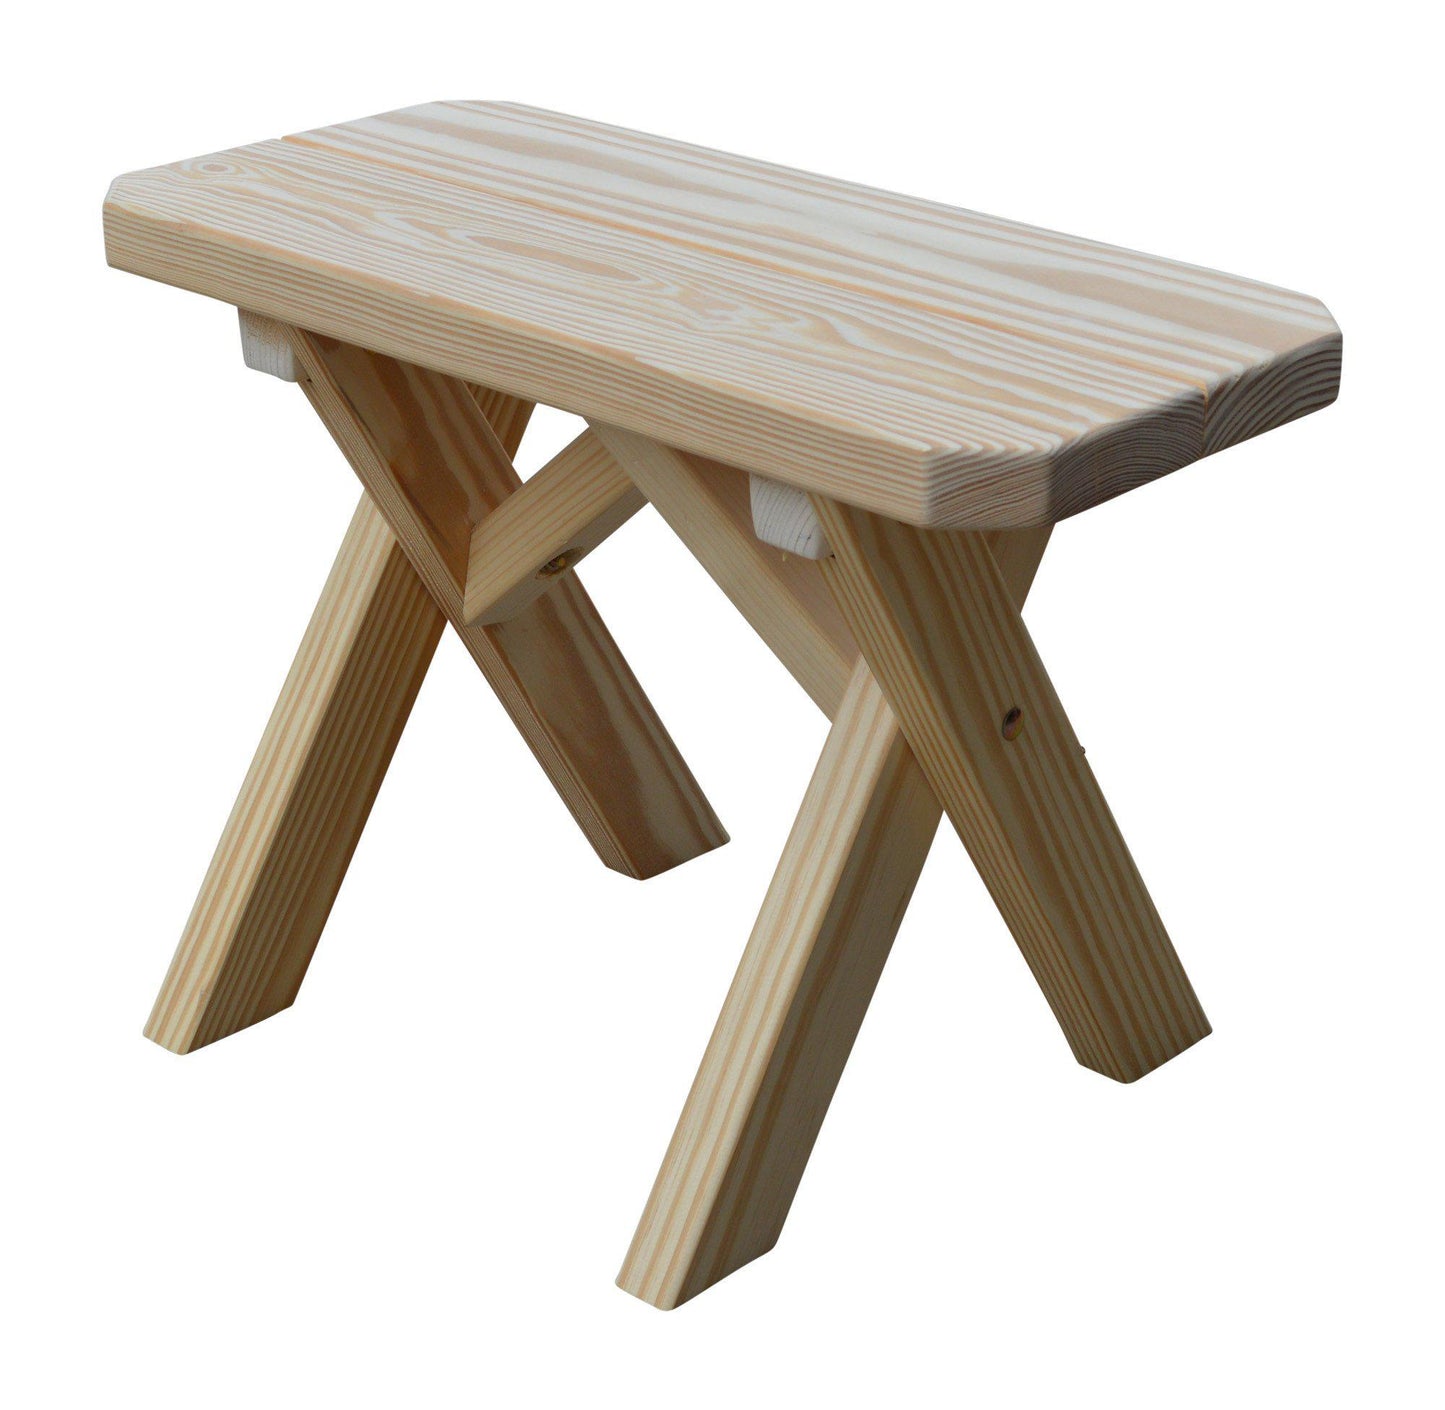 A&L Furniture Co. Pressure Treated Pine 23" Crossleg Bench Only - LEAD TIME TO SHIP 10 BUSINESS DAYS